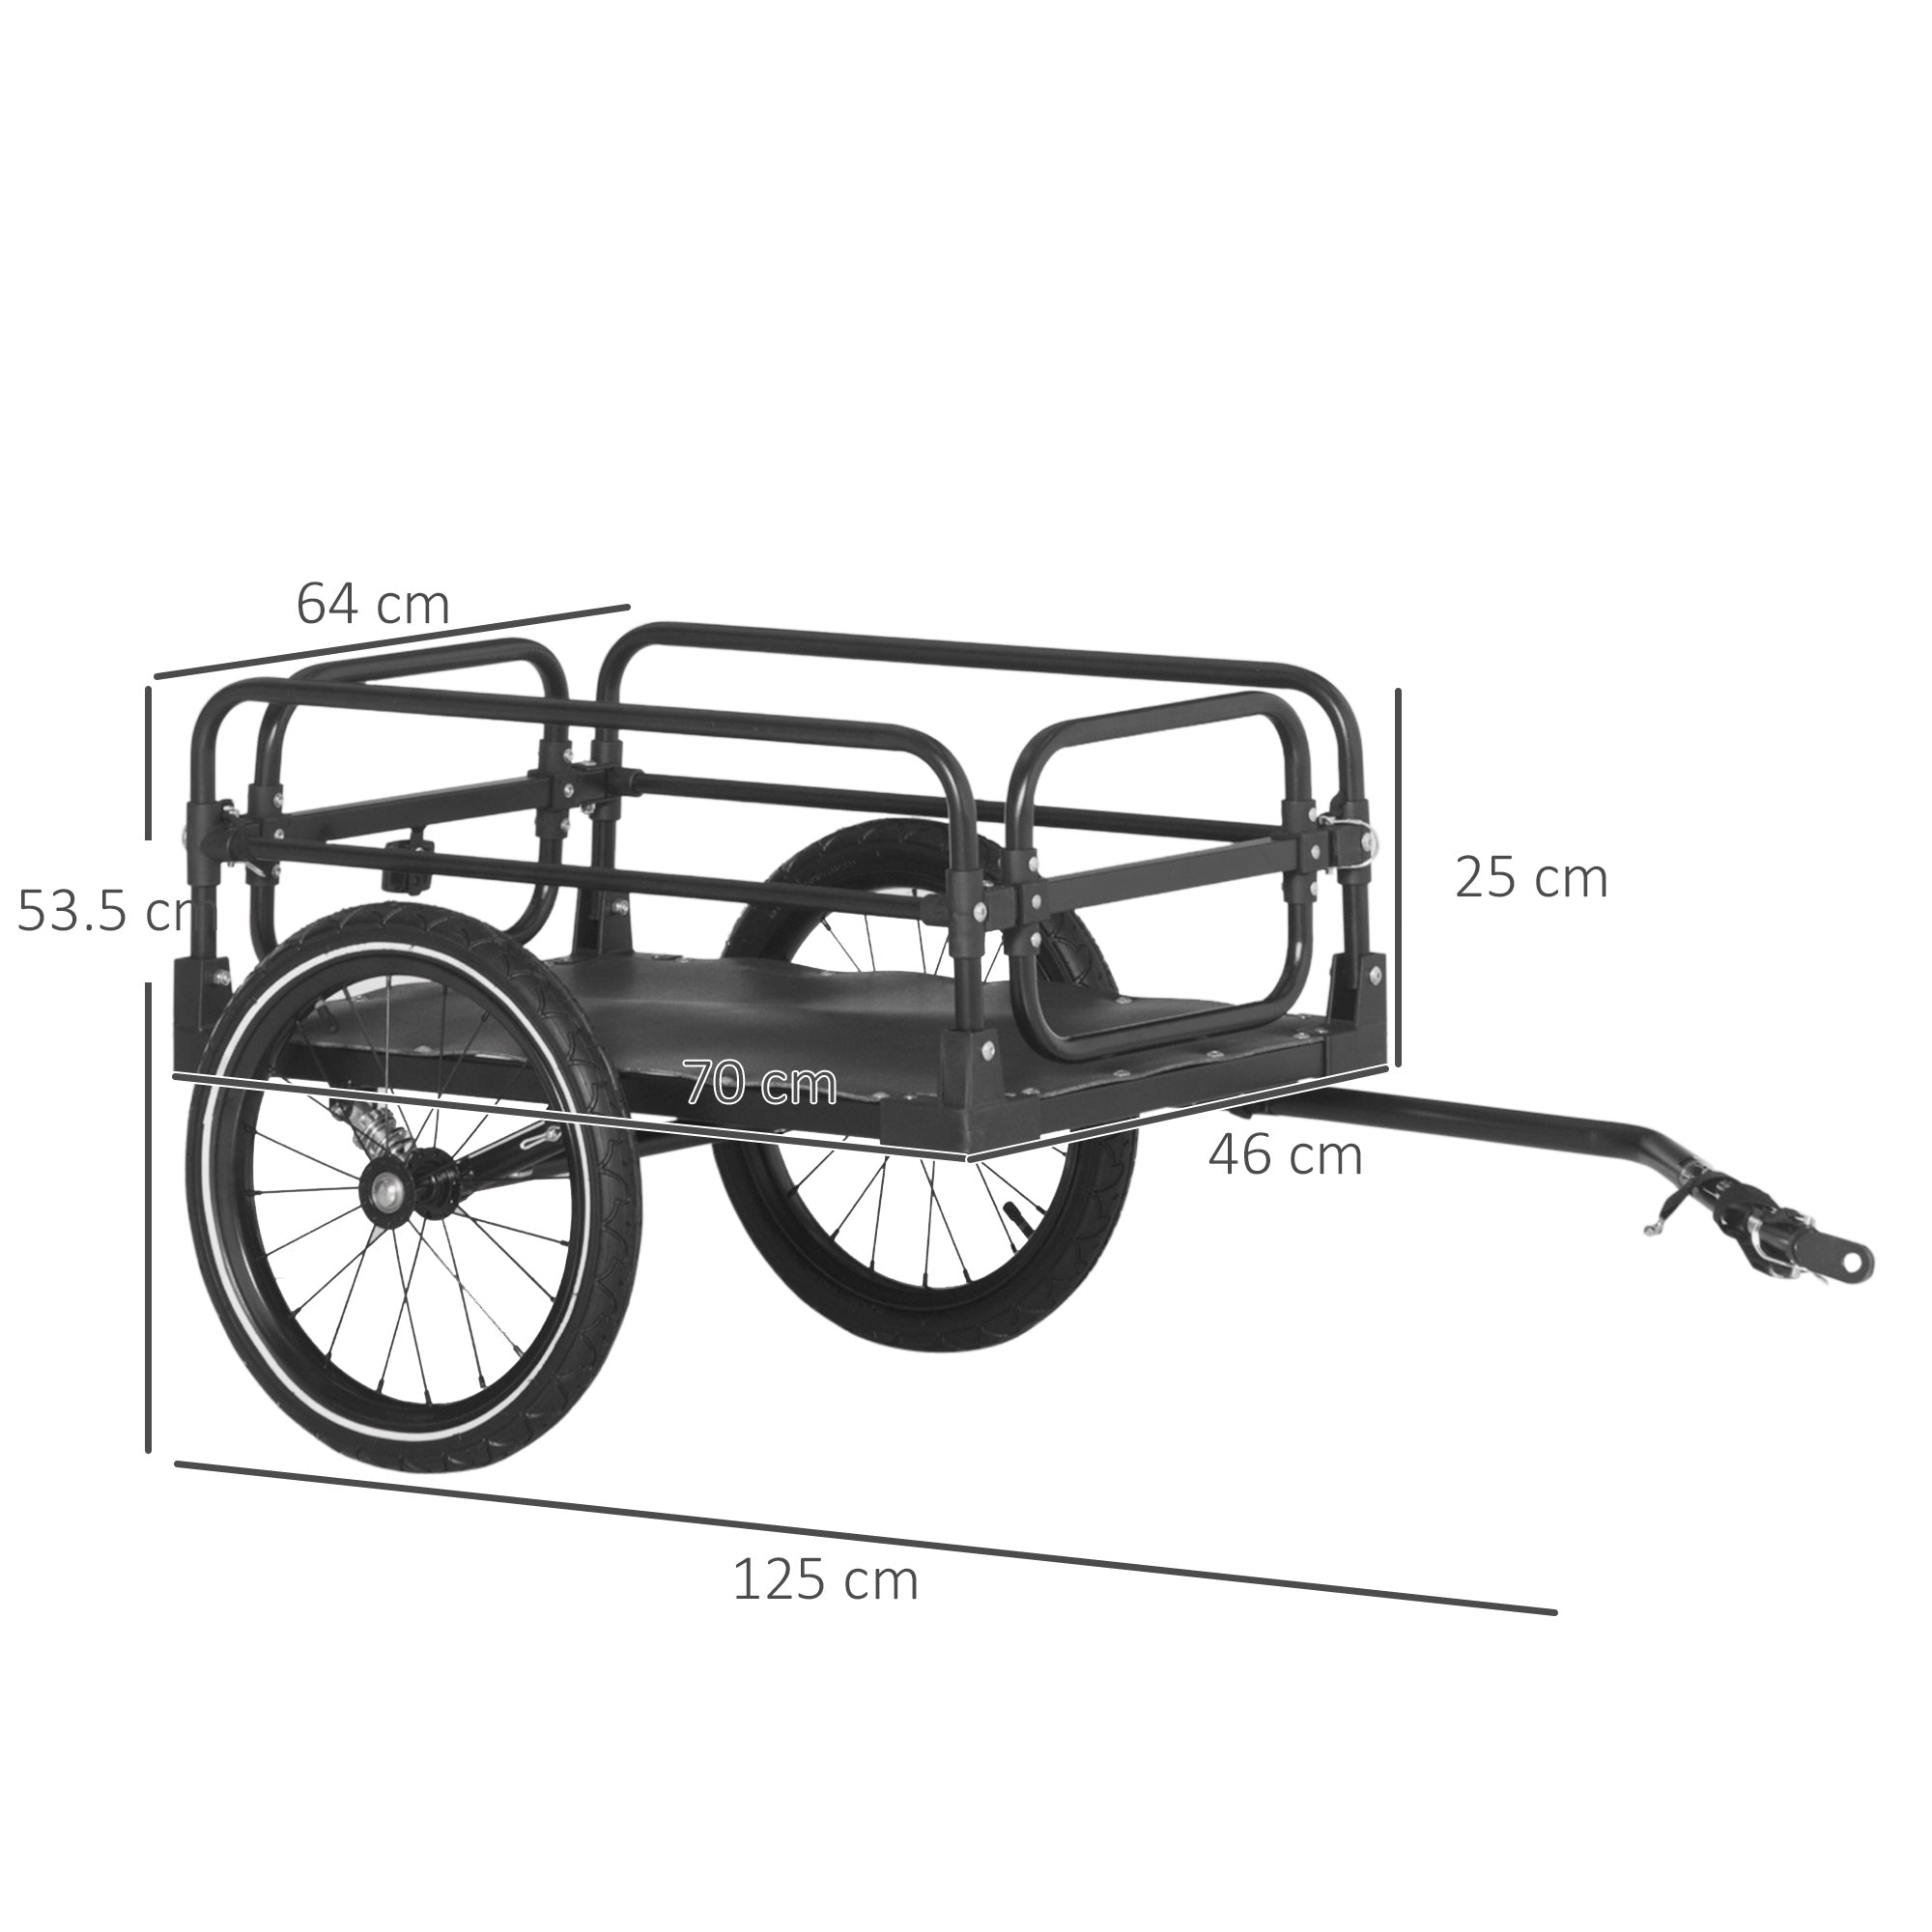 Steel Bike Trailer with Triple Safety, Wagon Bicycle Trailer with Suspension, 2 Wheels Outdoor Storage Carrier, Black-2